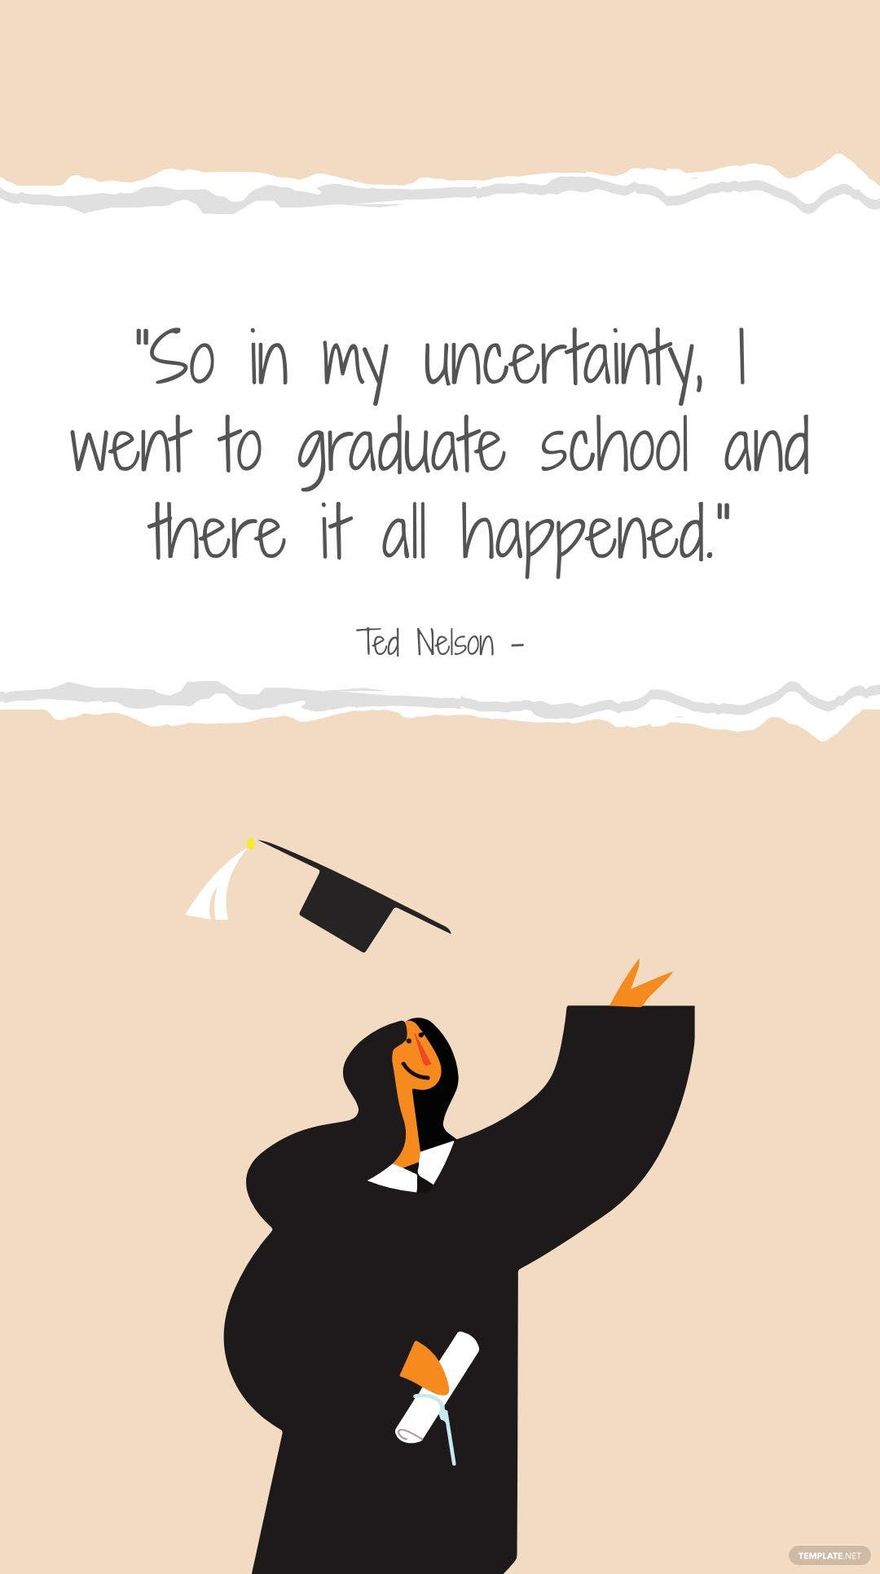 Ted Nelson - So in my uncertainty, I went to graduate school and there it all happened.